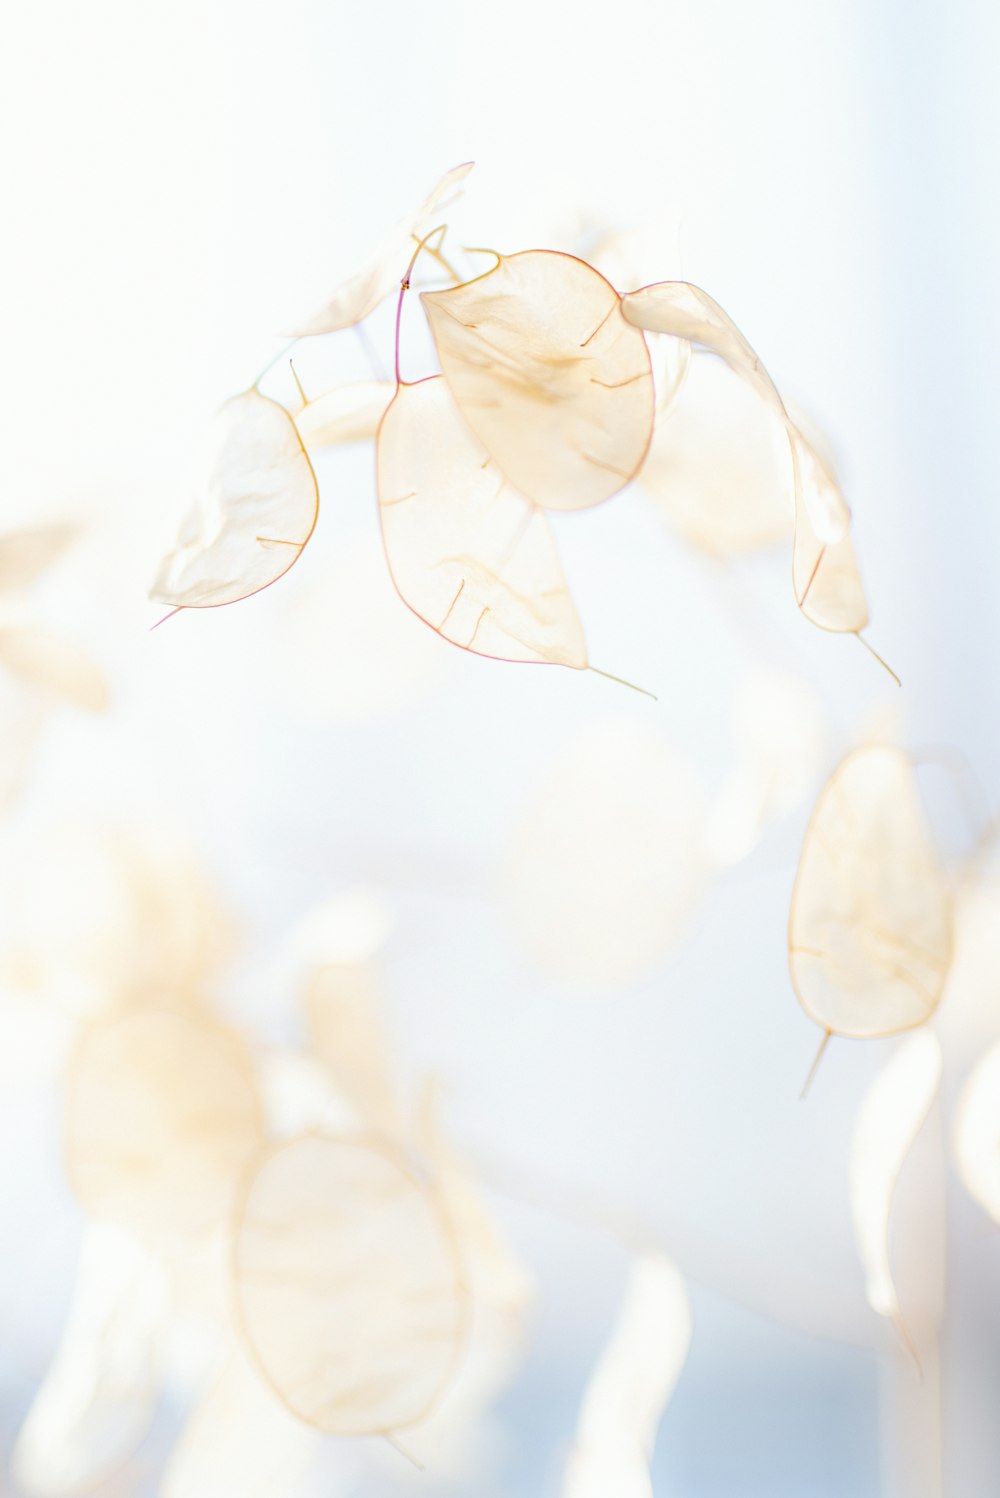 white and brown flower petals